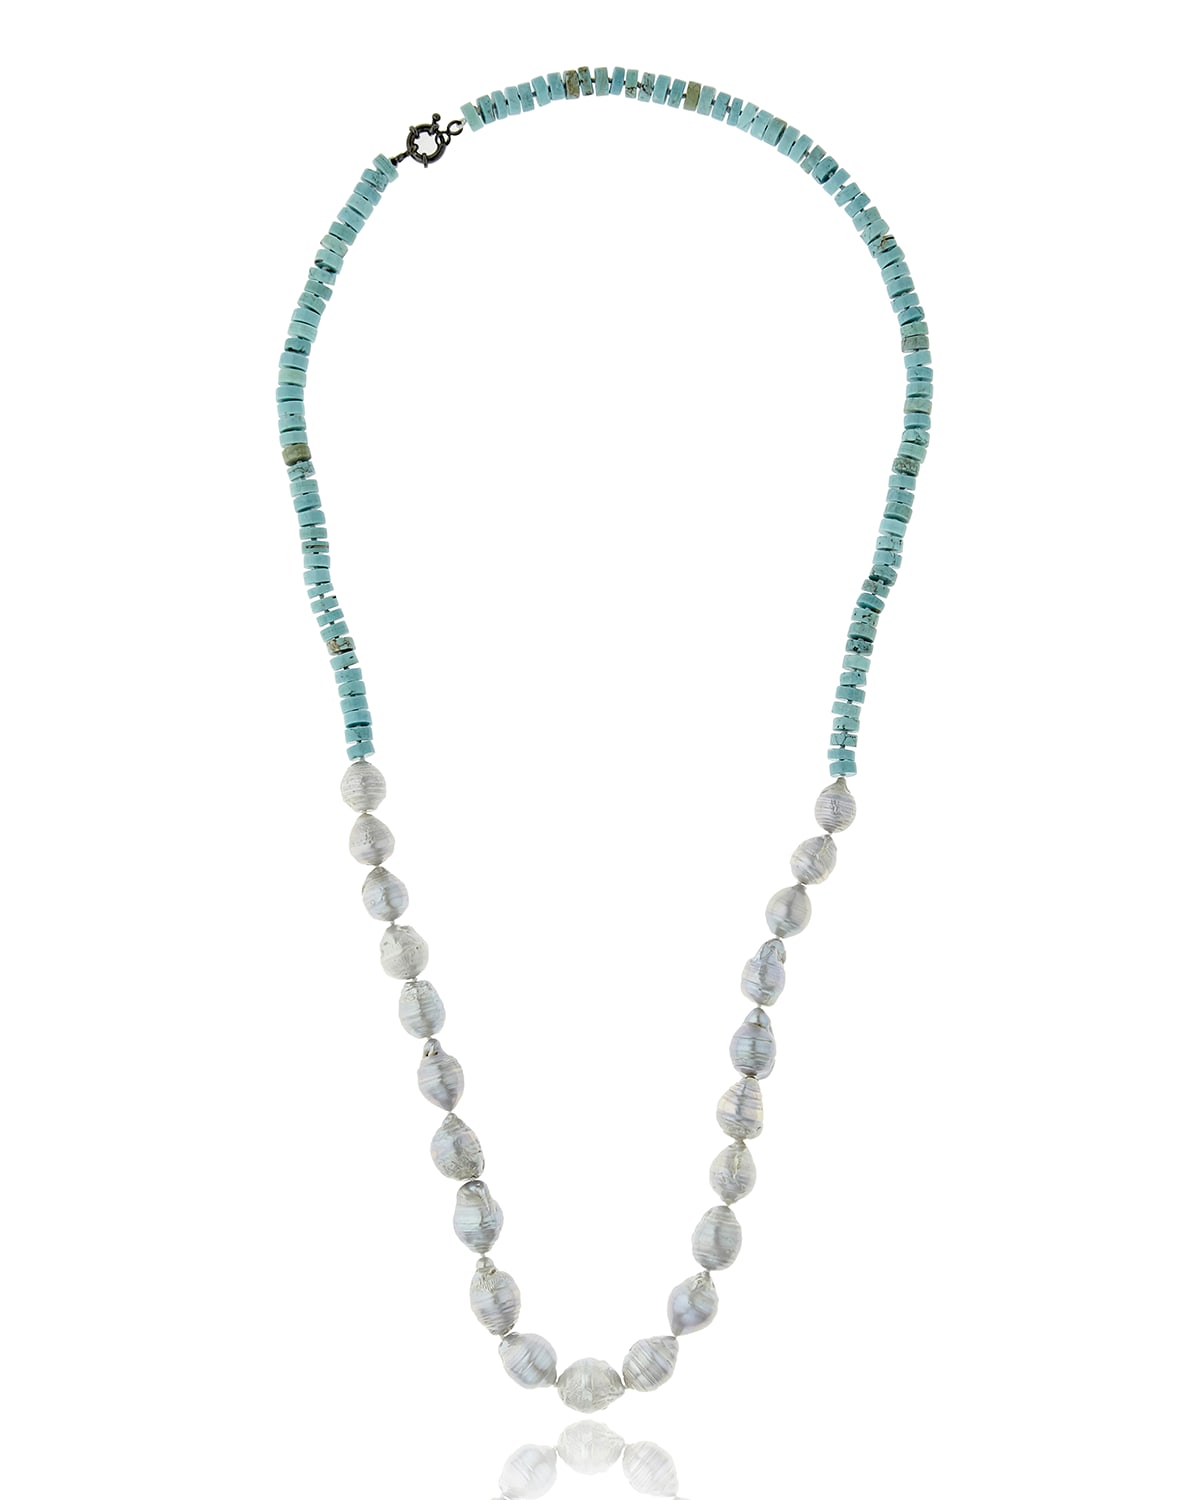 M.C.L. by Matthew Campbell Laurenza Half Turquoise & Baroque Pearl Necklace